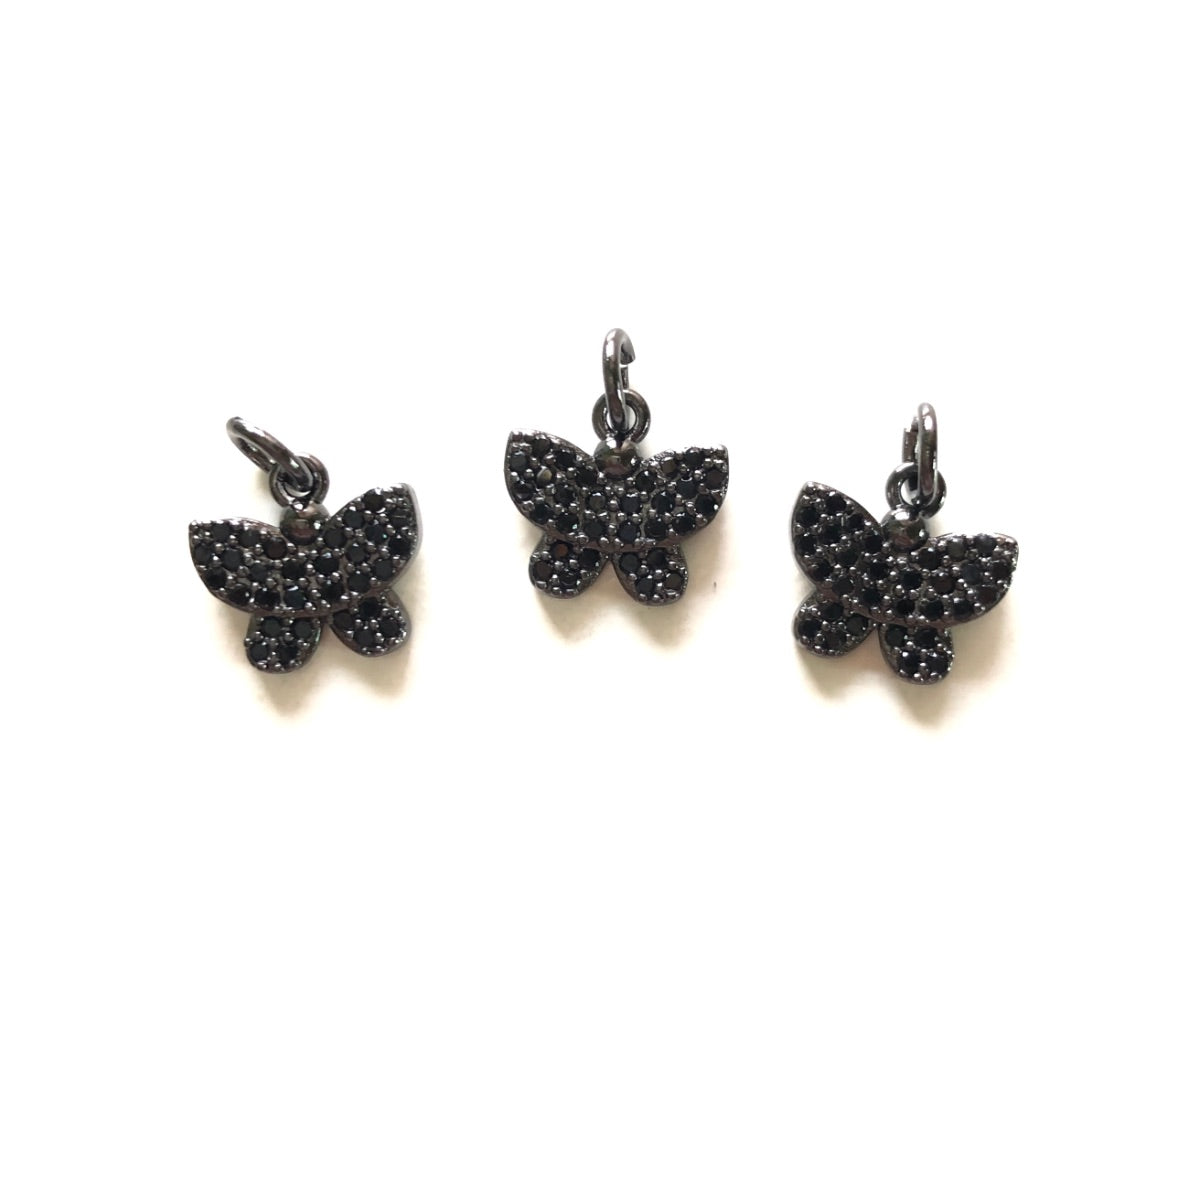 10pcs/lot 10.8*10.3mm Small Size CZ Pave Butterfly Charms Black on Black CZ Paved Charms Butterflies Small Sizes Charms Beads Beyond